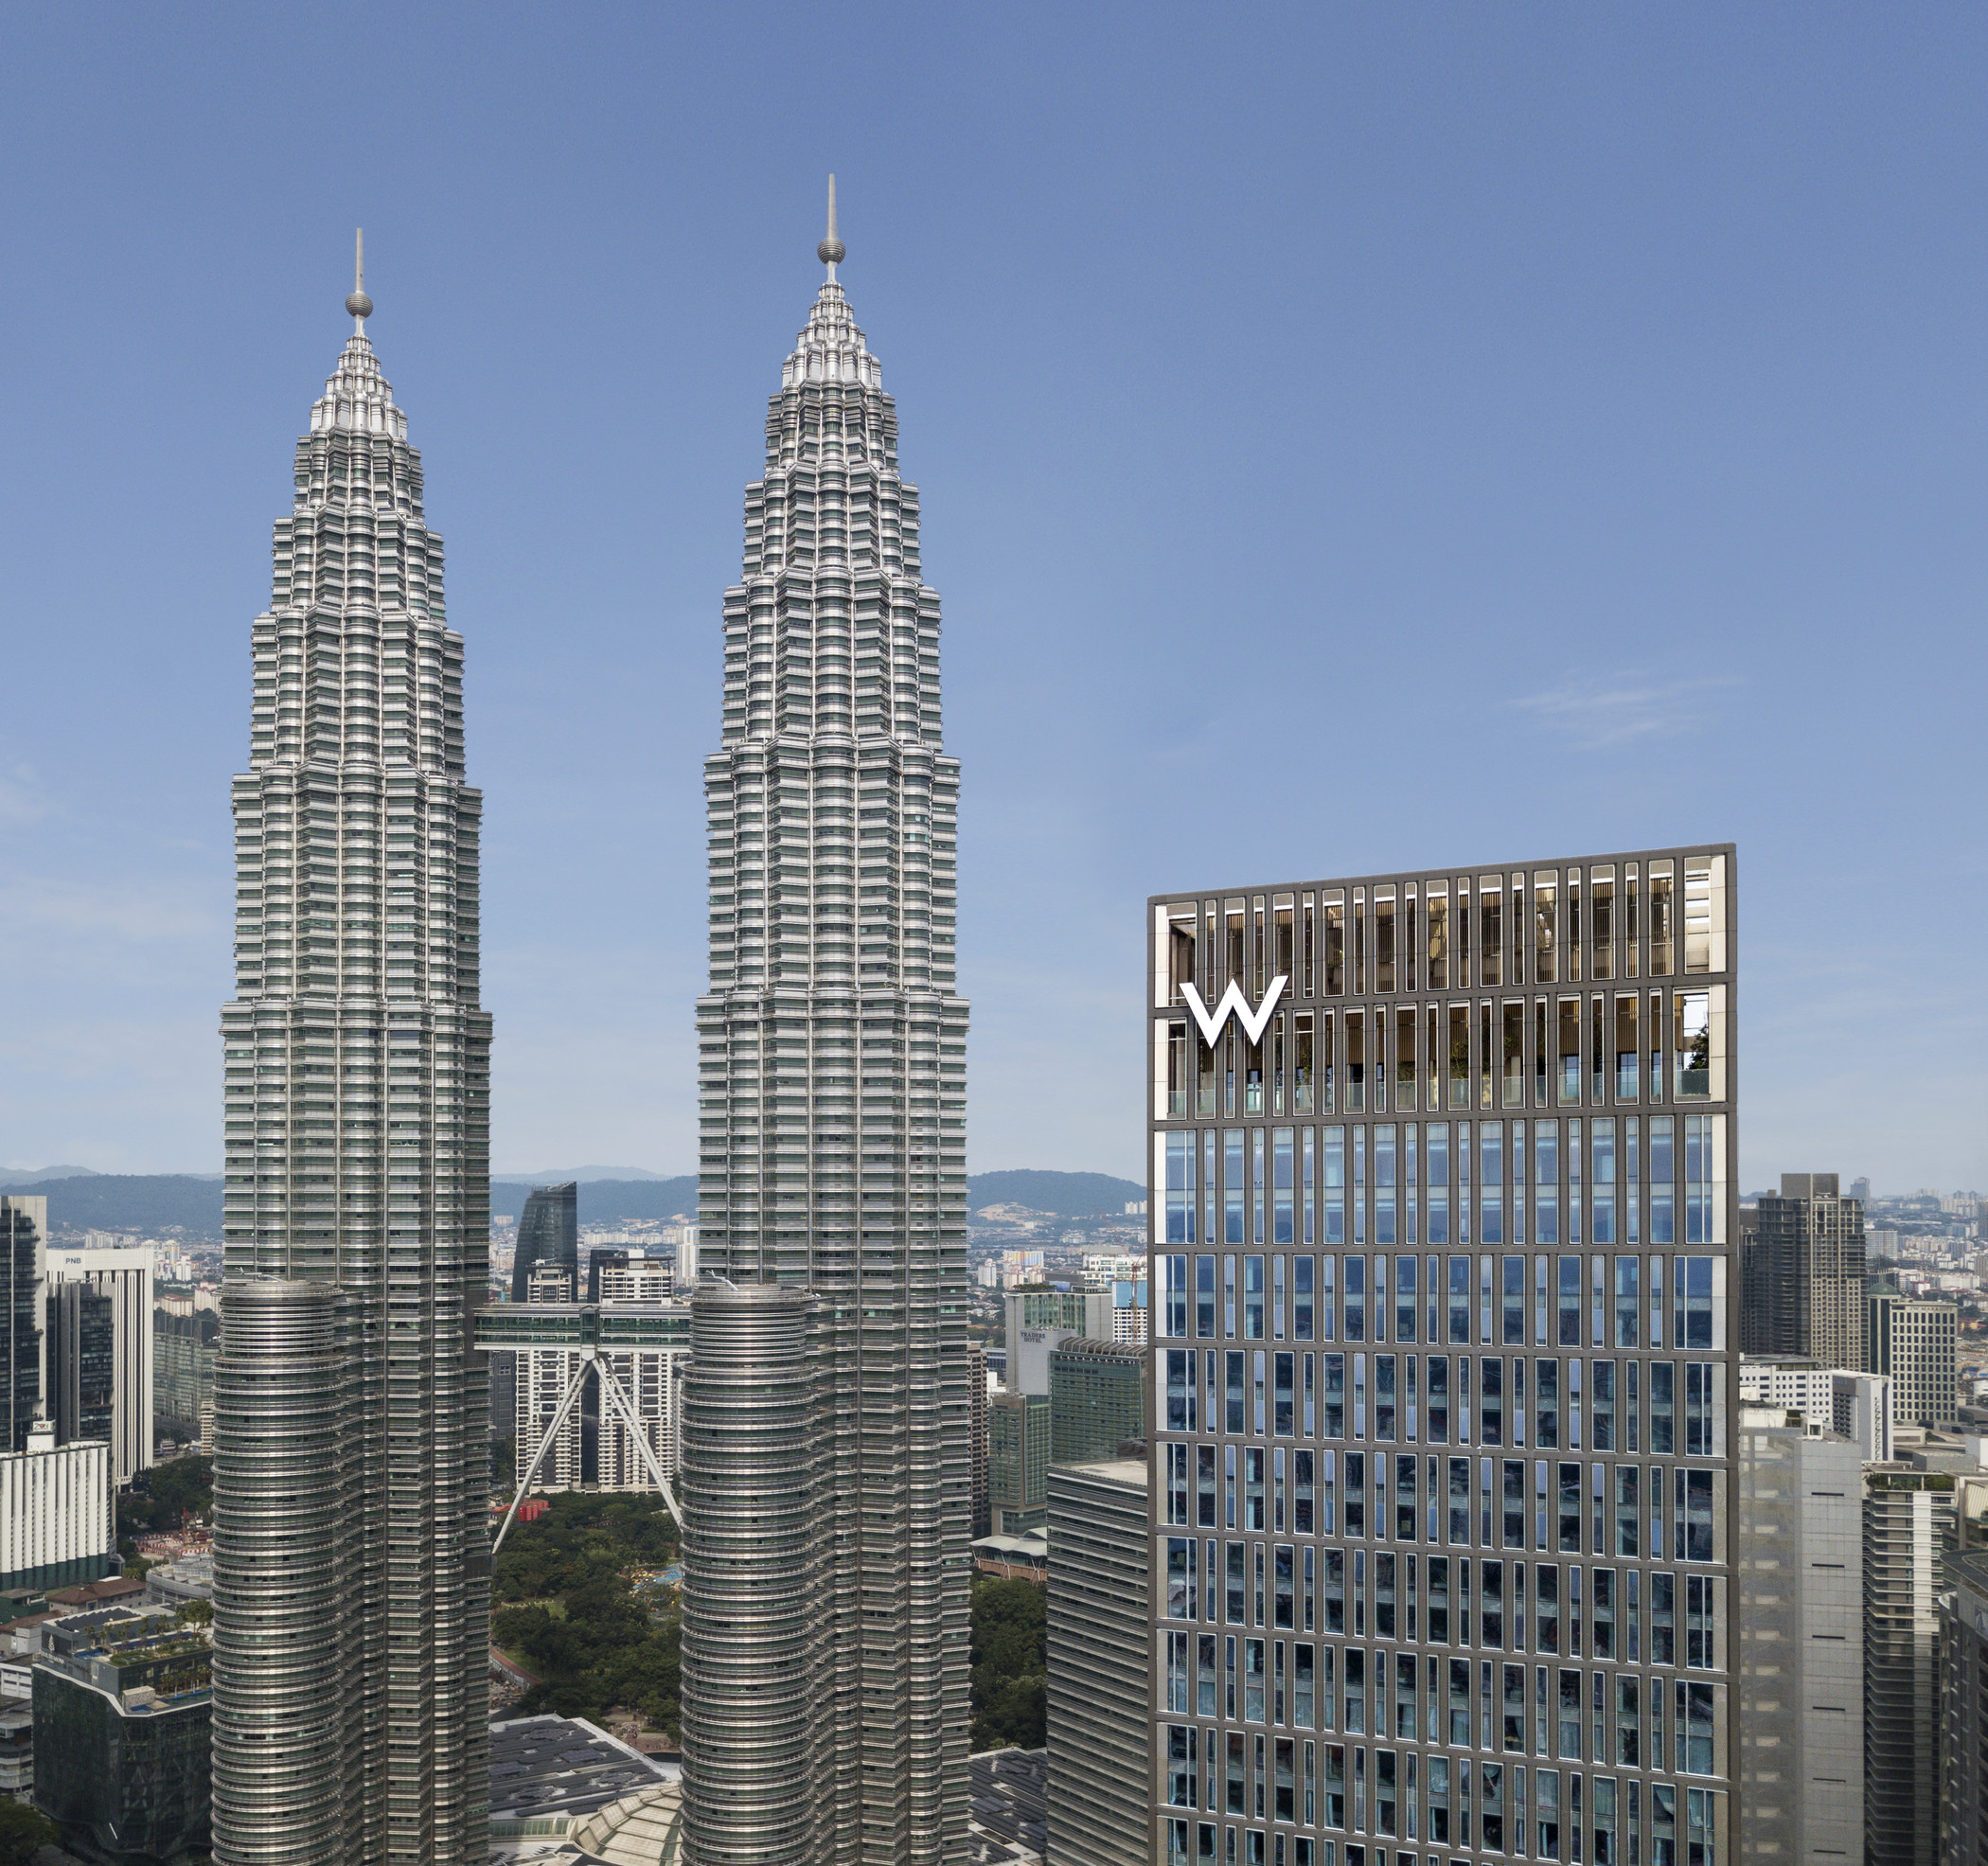 The new hotel is next to the citys iconic Petronas Towers